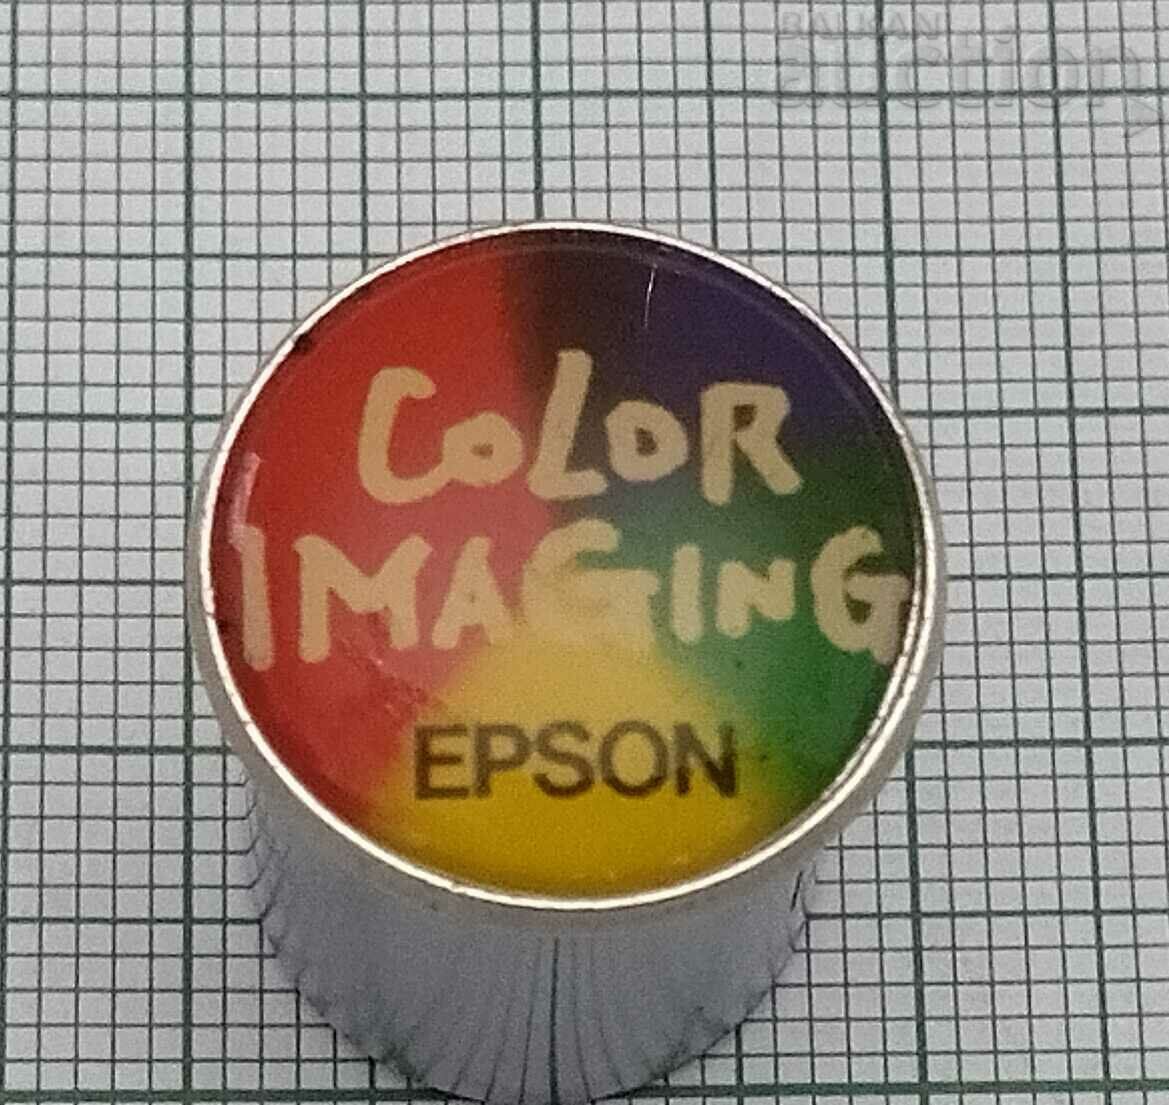 COLOR IMAGING EPSON BADGE PIN